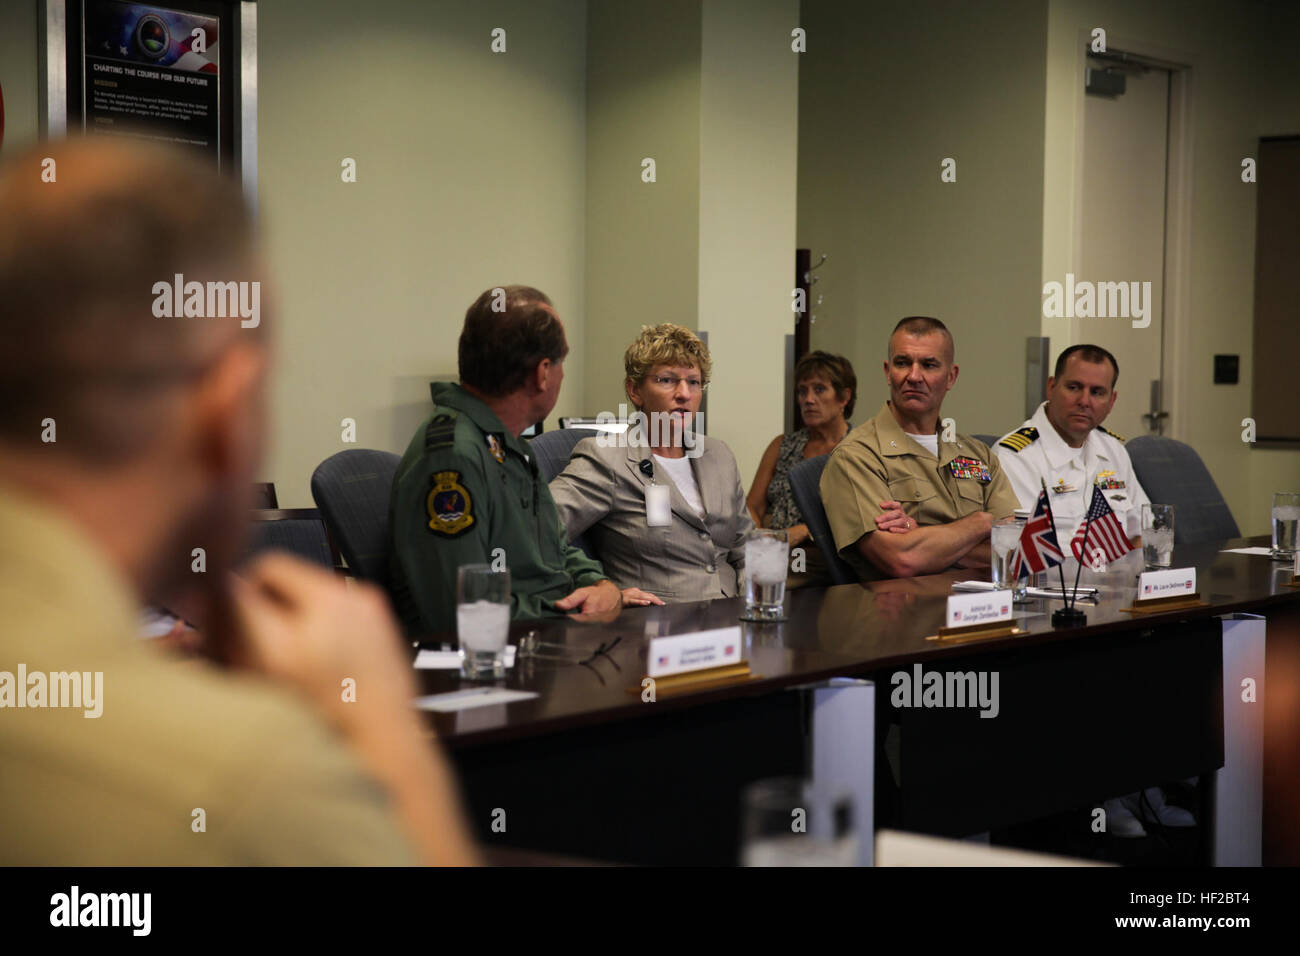 The First Sea Lord and Chief of Naval Staff of the British Royal Navy, Adm. Sir George Zambellas, left, attends a brief alongside Laura DeSimone, center, and U.S. Marine Corps and Navy personnel at the Missile Defense Agency at Dahlgren, Va., July 29, 2014. Zambellas is taking part in the Commandant of the Marine Corps' Counterpart Program, which invites foreign military leaders to visit the United States and interact with U.S. military leaders. (U.S. Marine Corps photo by Cpl. Michael C. Guinto/Released) Note: portions of this image have been blurred for security. First Sea Lord Counterpart V Stock Photo